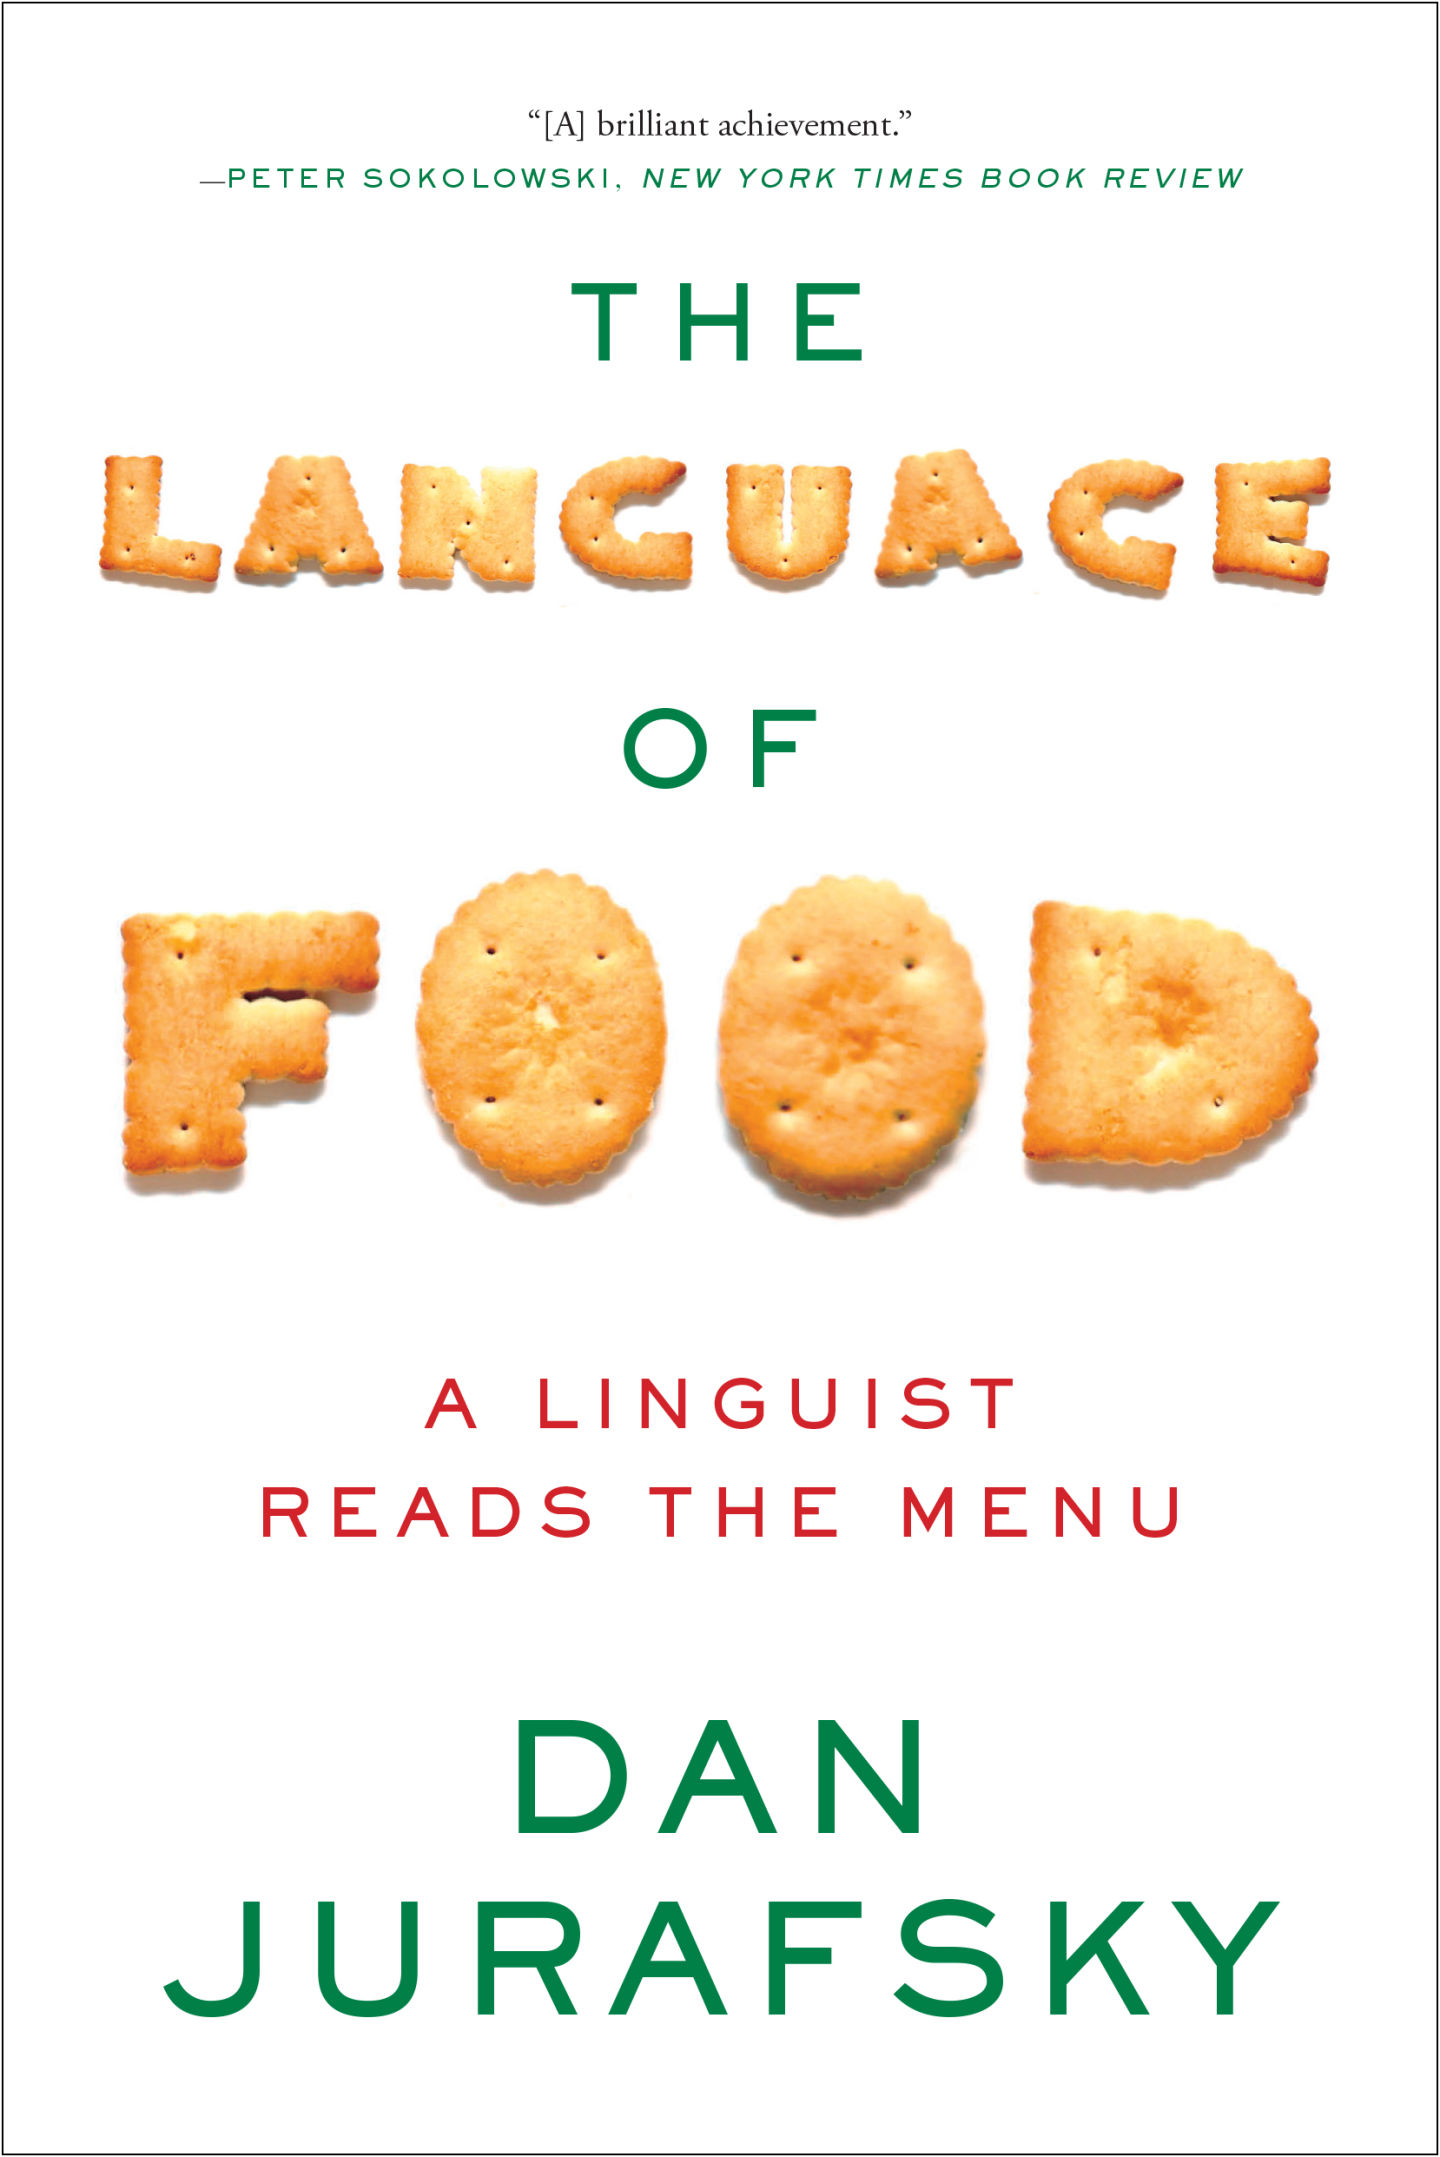 The Language of Food: A Linguist Reads the Menu by Dan Jurafsky